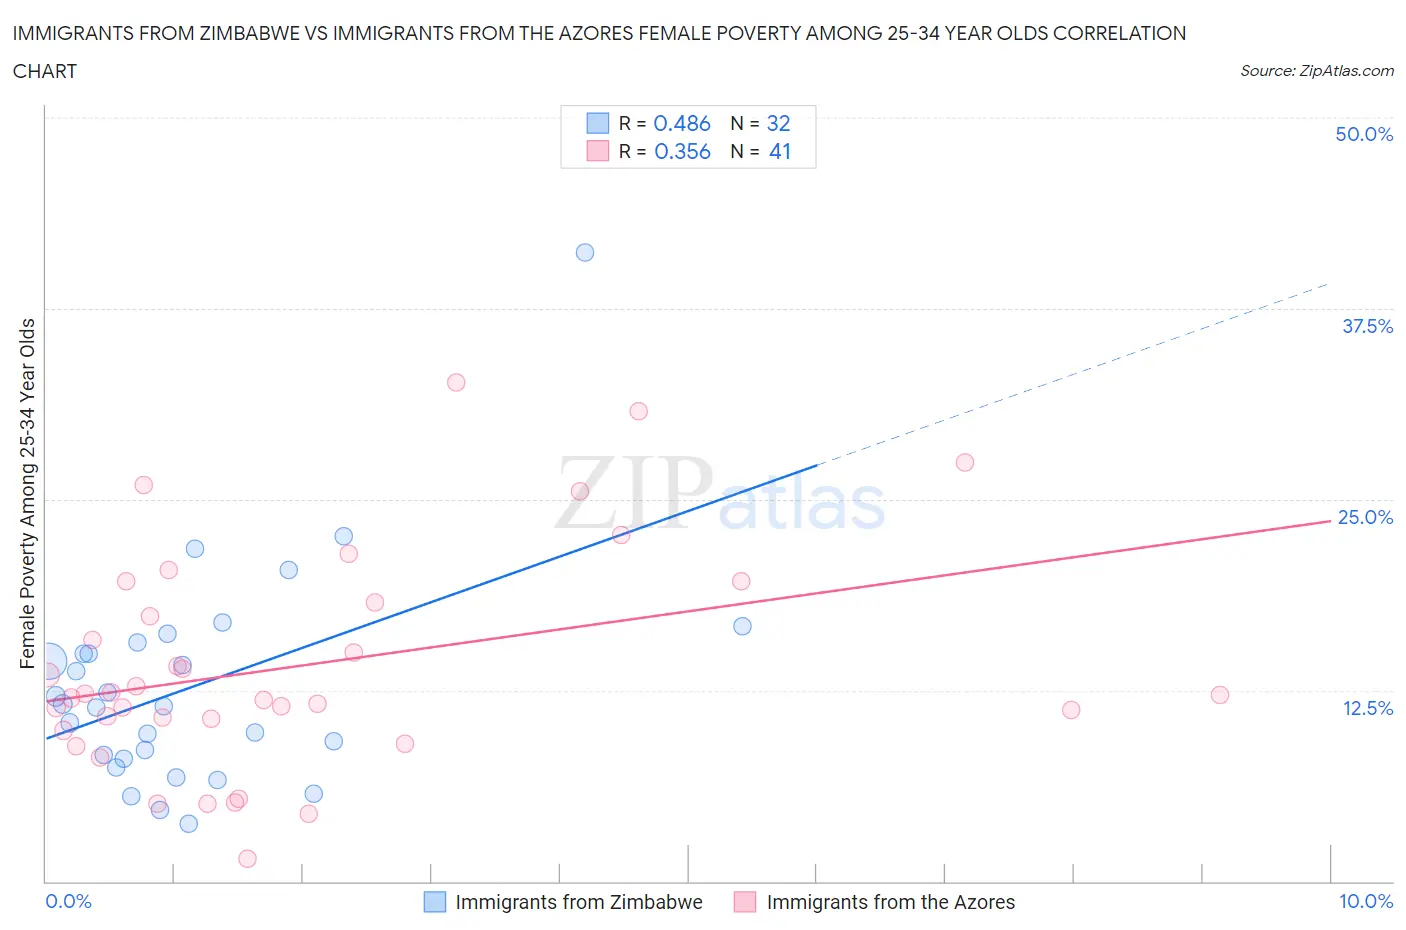 Immigrants from Zimbabwe vs Immigrants from the Azores Female Poverty Among 25-34 Year Olds